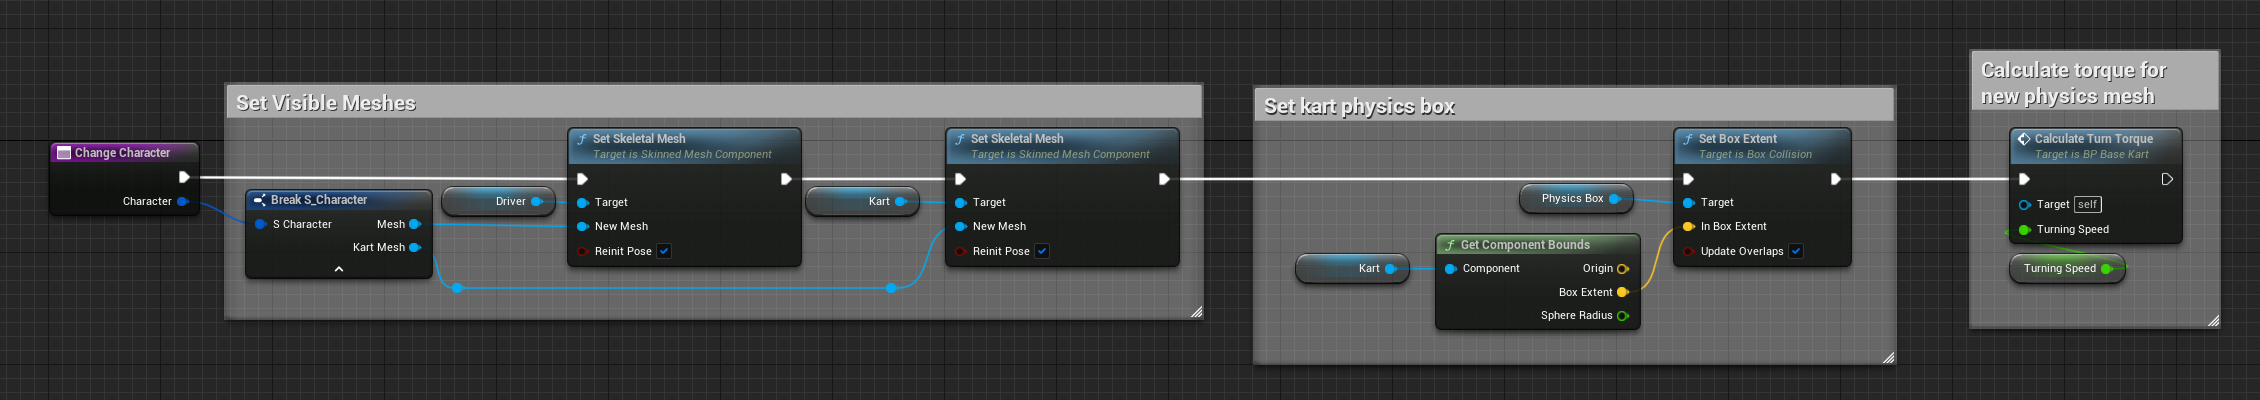 A screenshot showing the process for setting up a character on the BaseKart class.